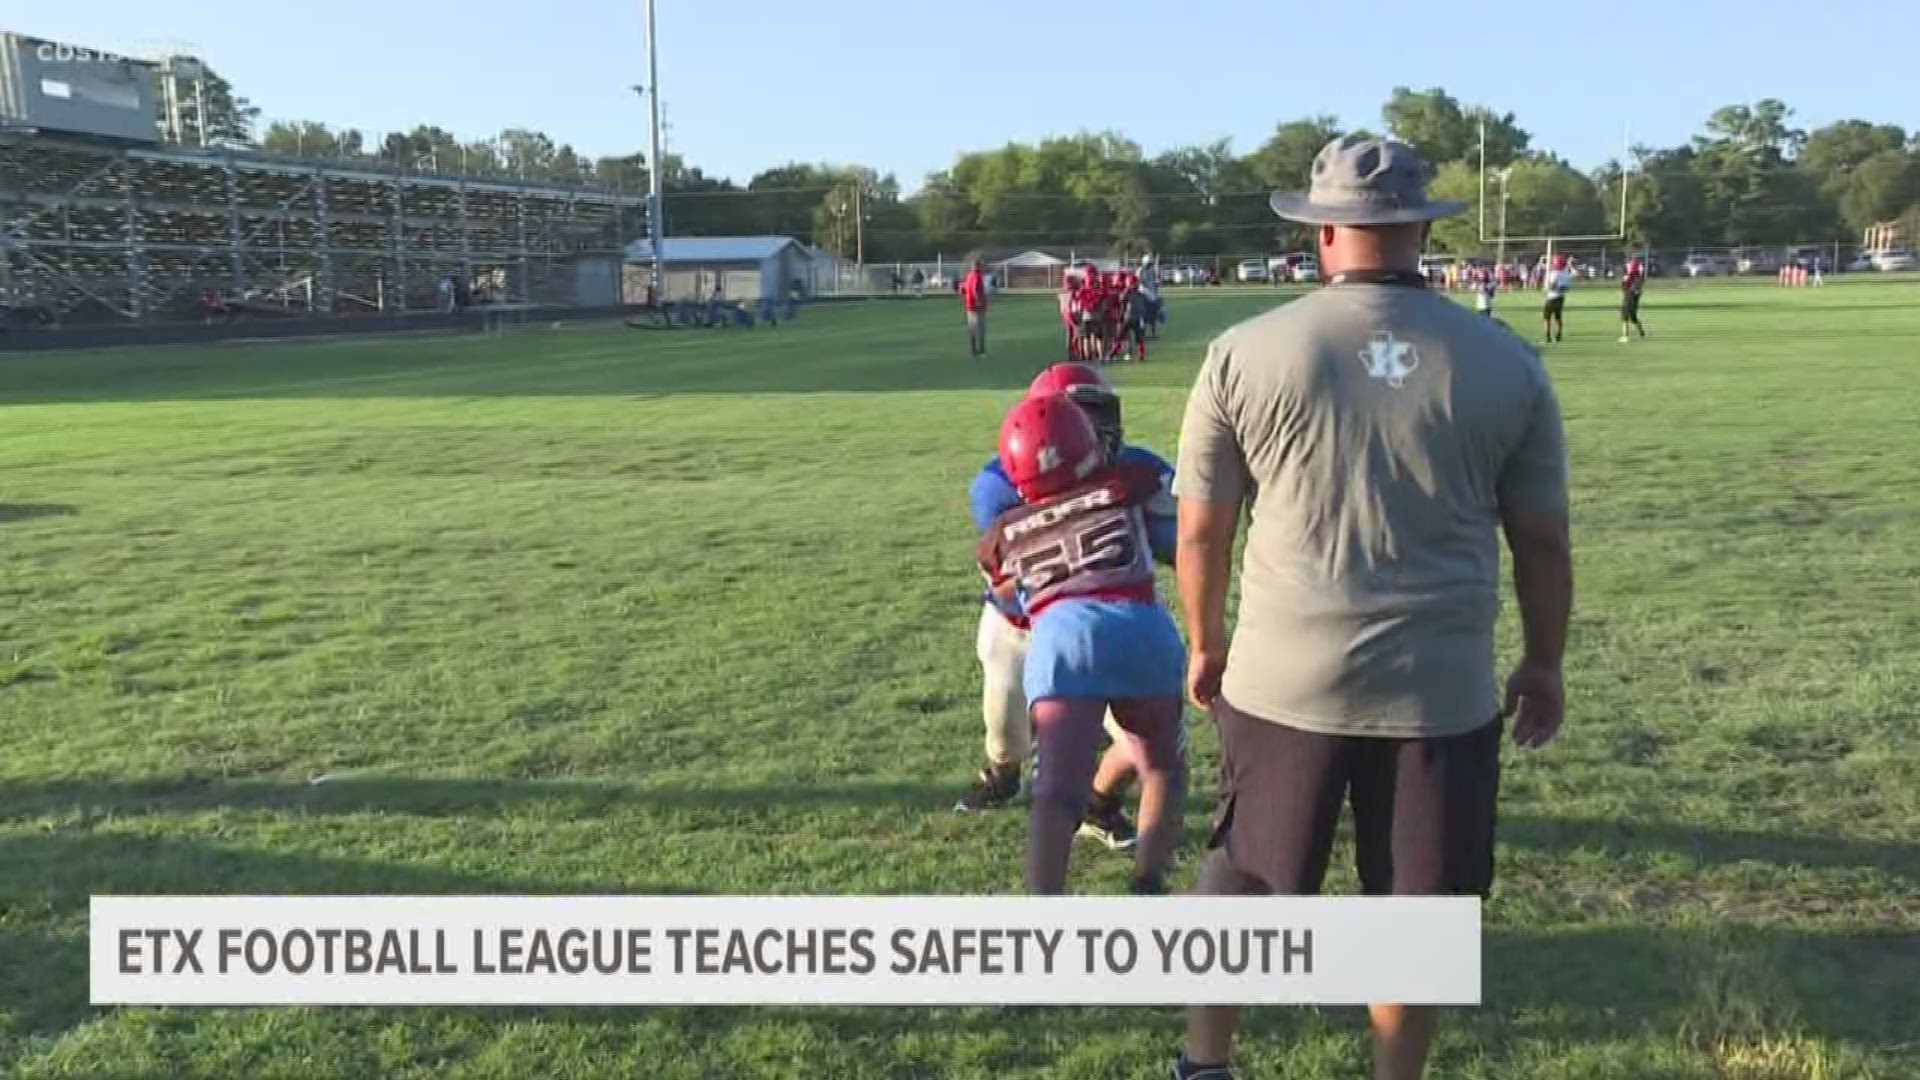 The Tri-County Youth Football League offers youth football for kids in the 5 to 12 age range.